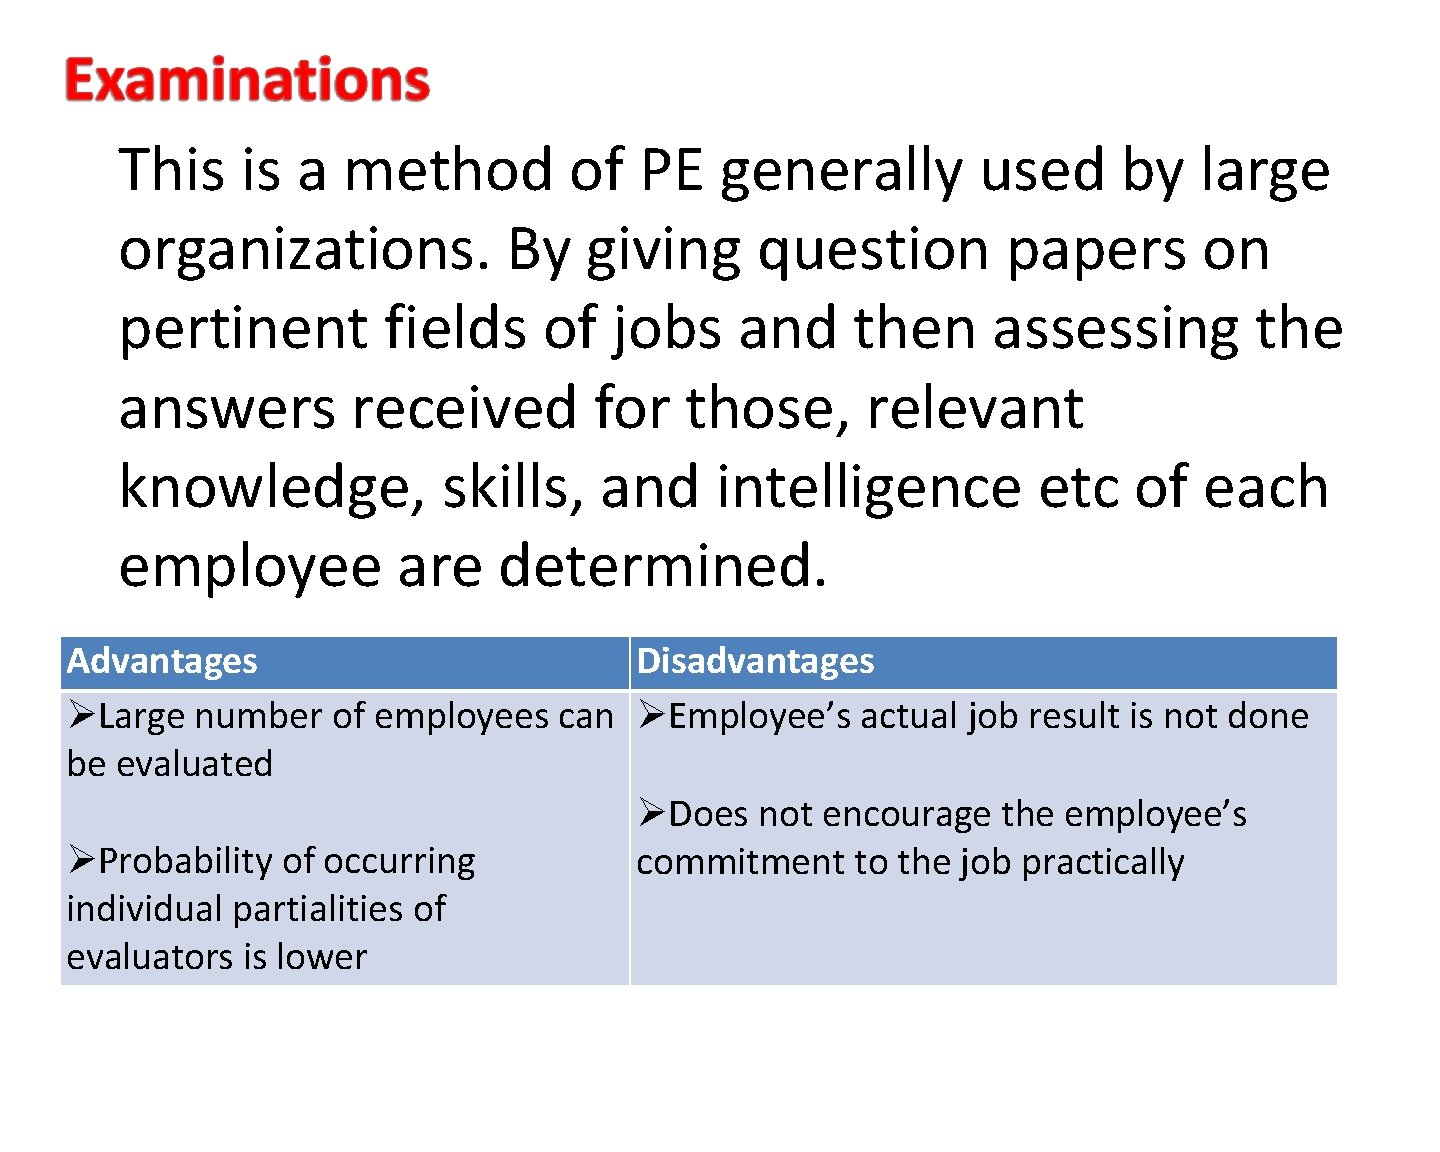 This is a method of PE generally used by large organizations. By giving question